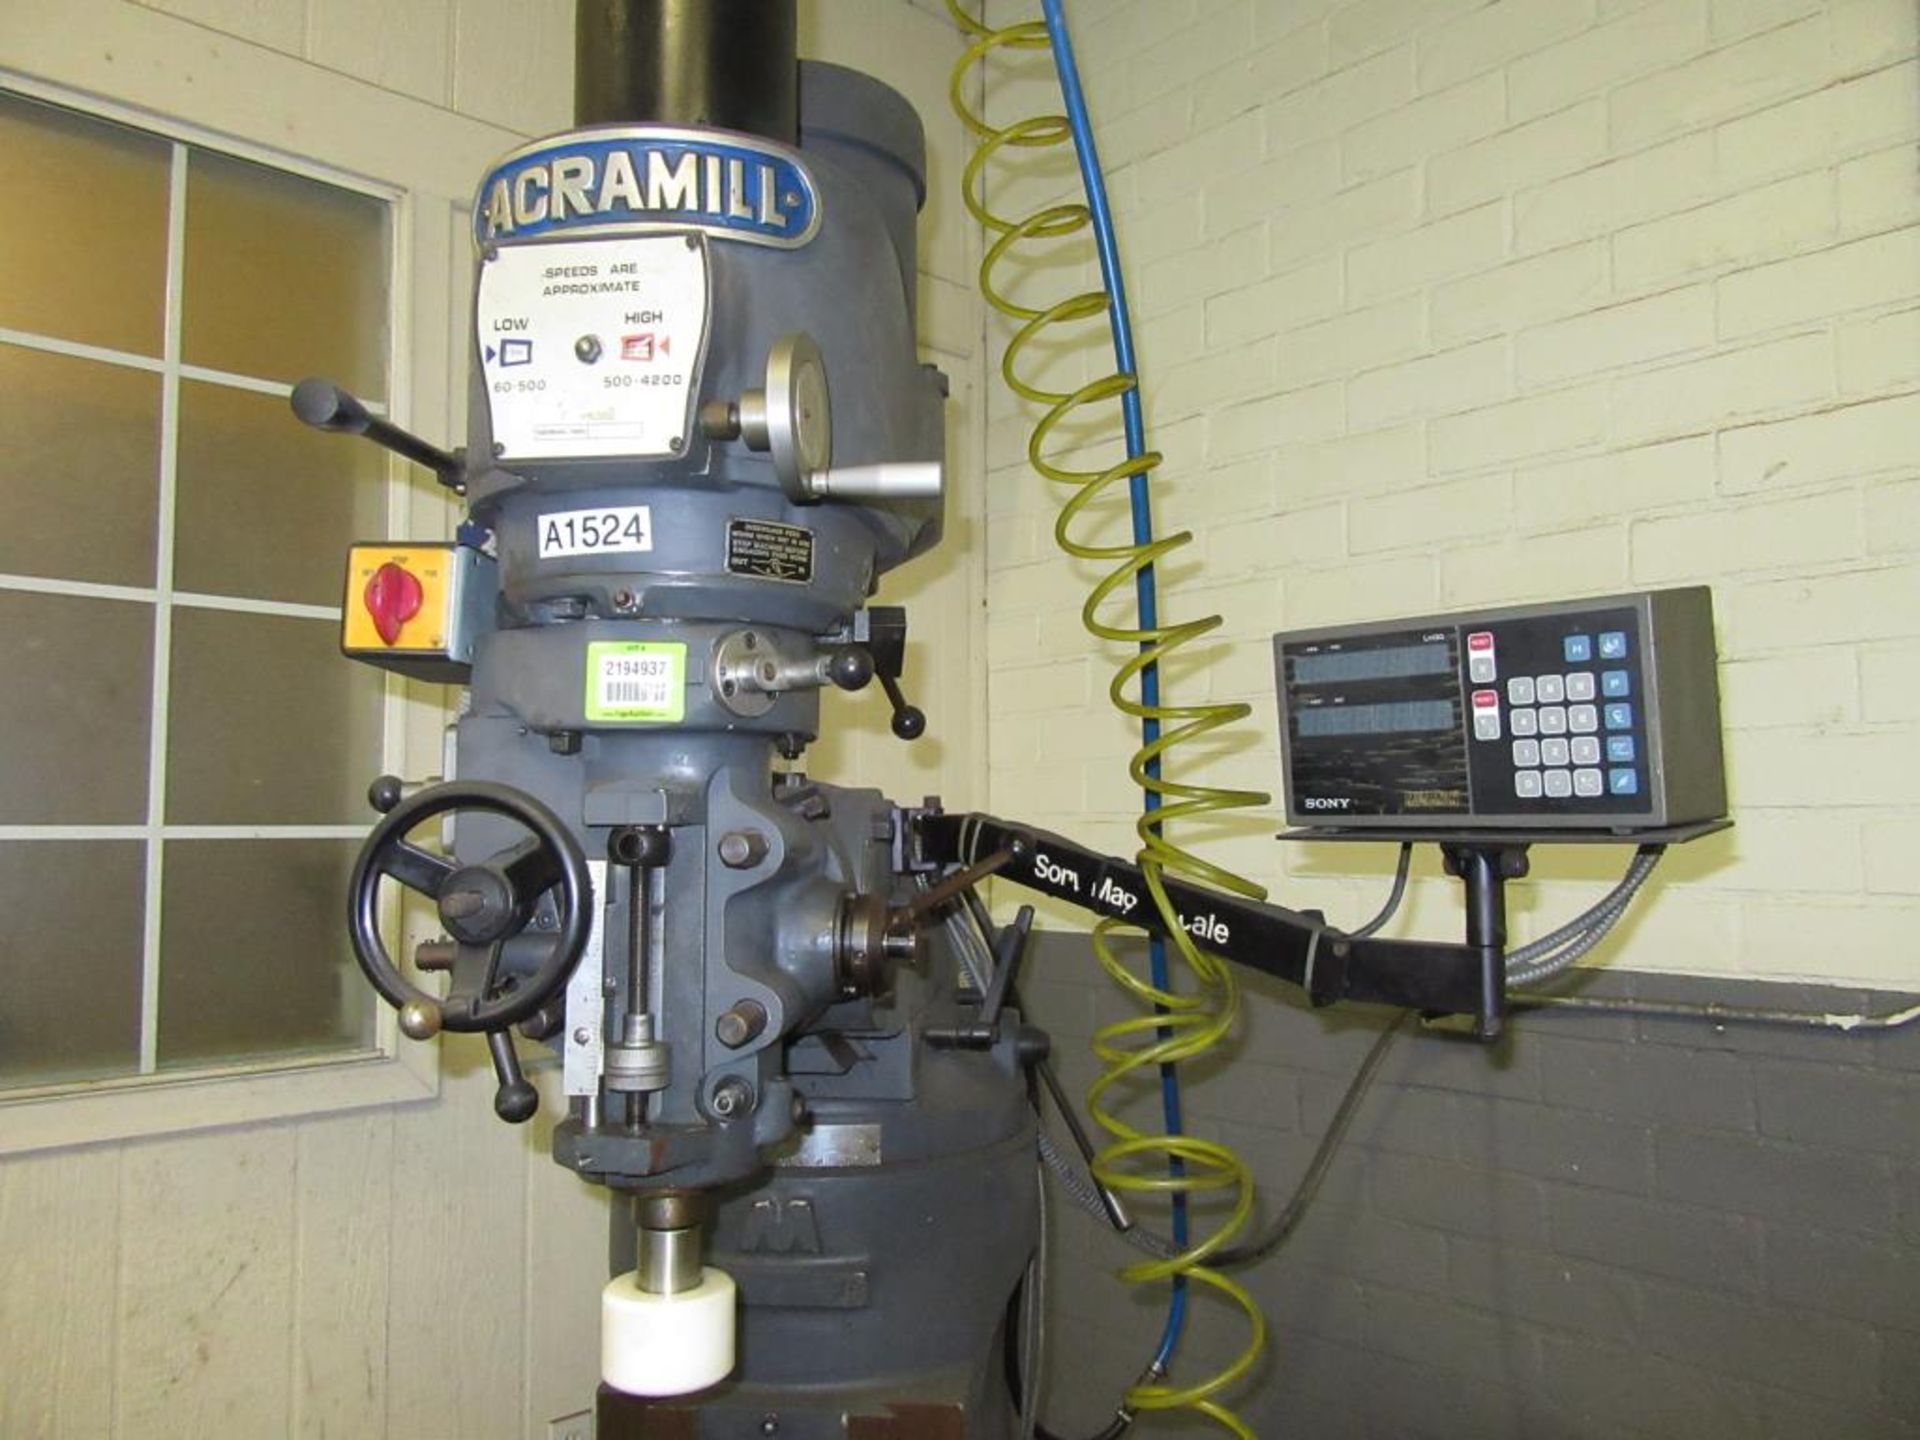 Acramill LS-2S Vertical Milling Machine 60 - 4200 RPM with T-Slot Table 42"L x 9"W, 2-Axis DRO, 2. - Image 4 of 7